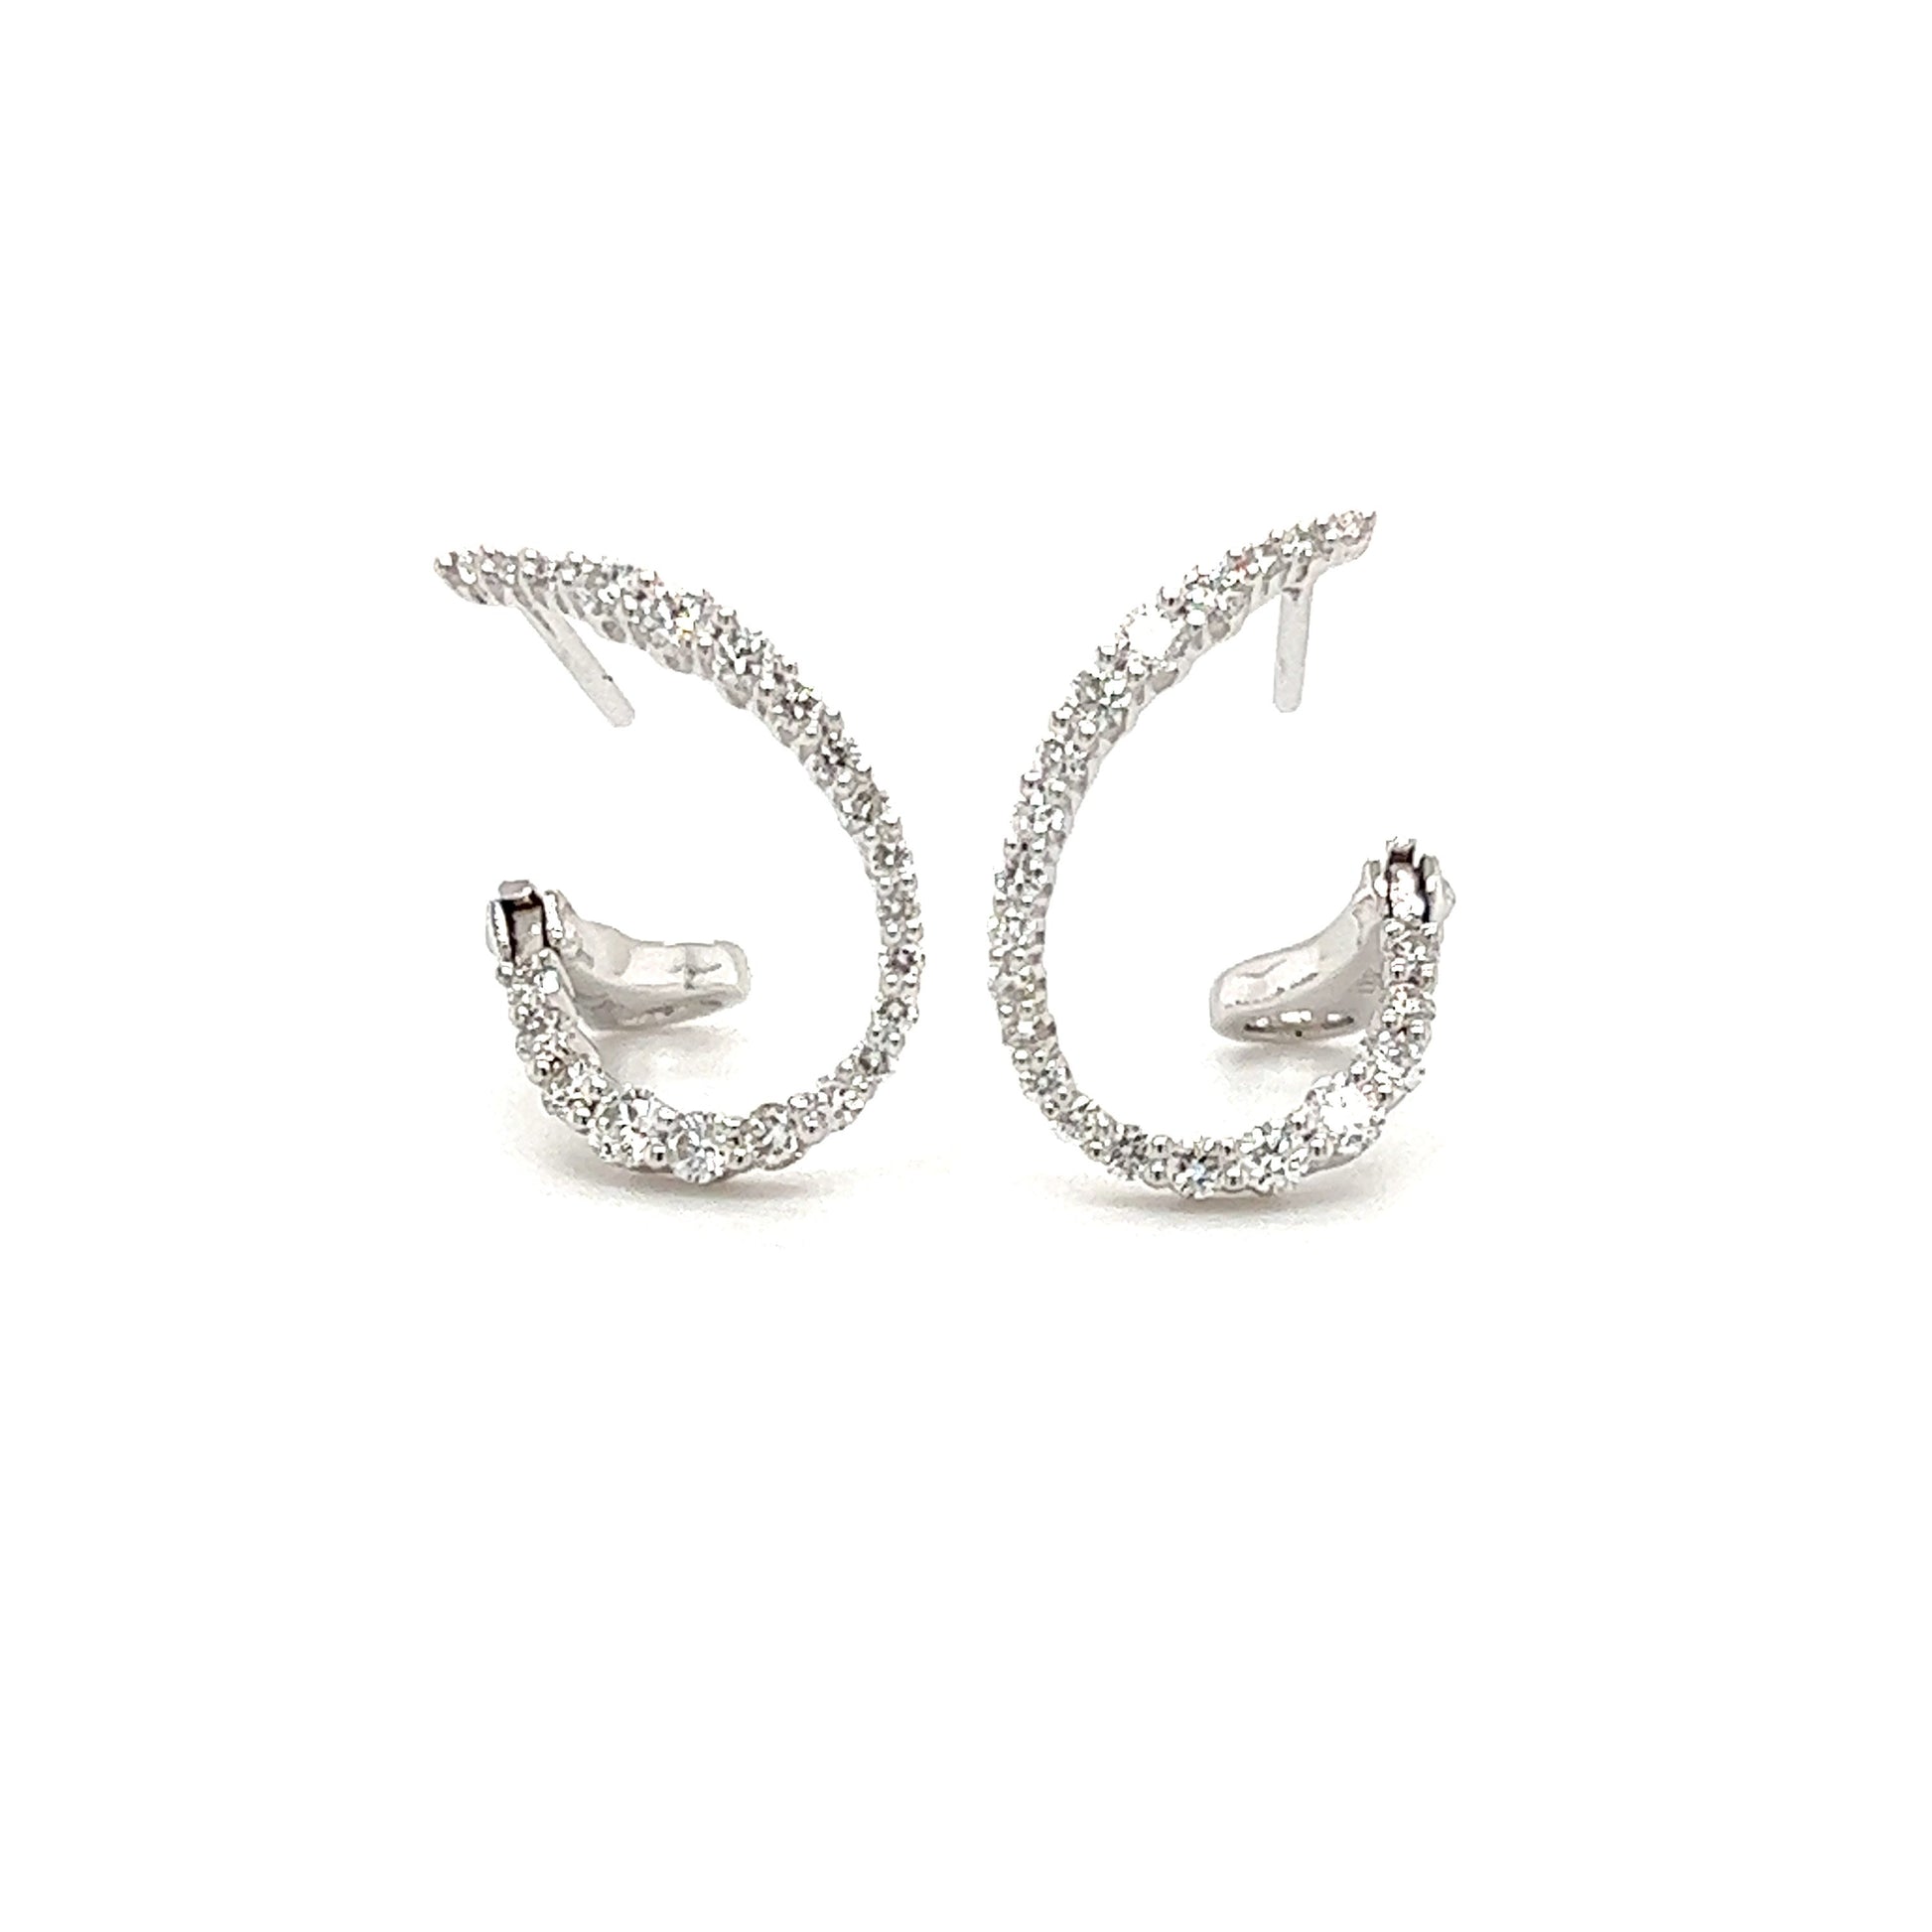 Swirled Diamond Hoop Earrings with 0.45ctw of Diamonds in 18K White Gold Front View Open Backs